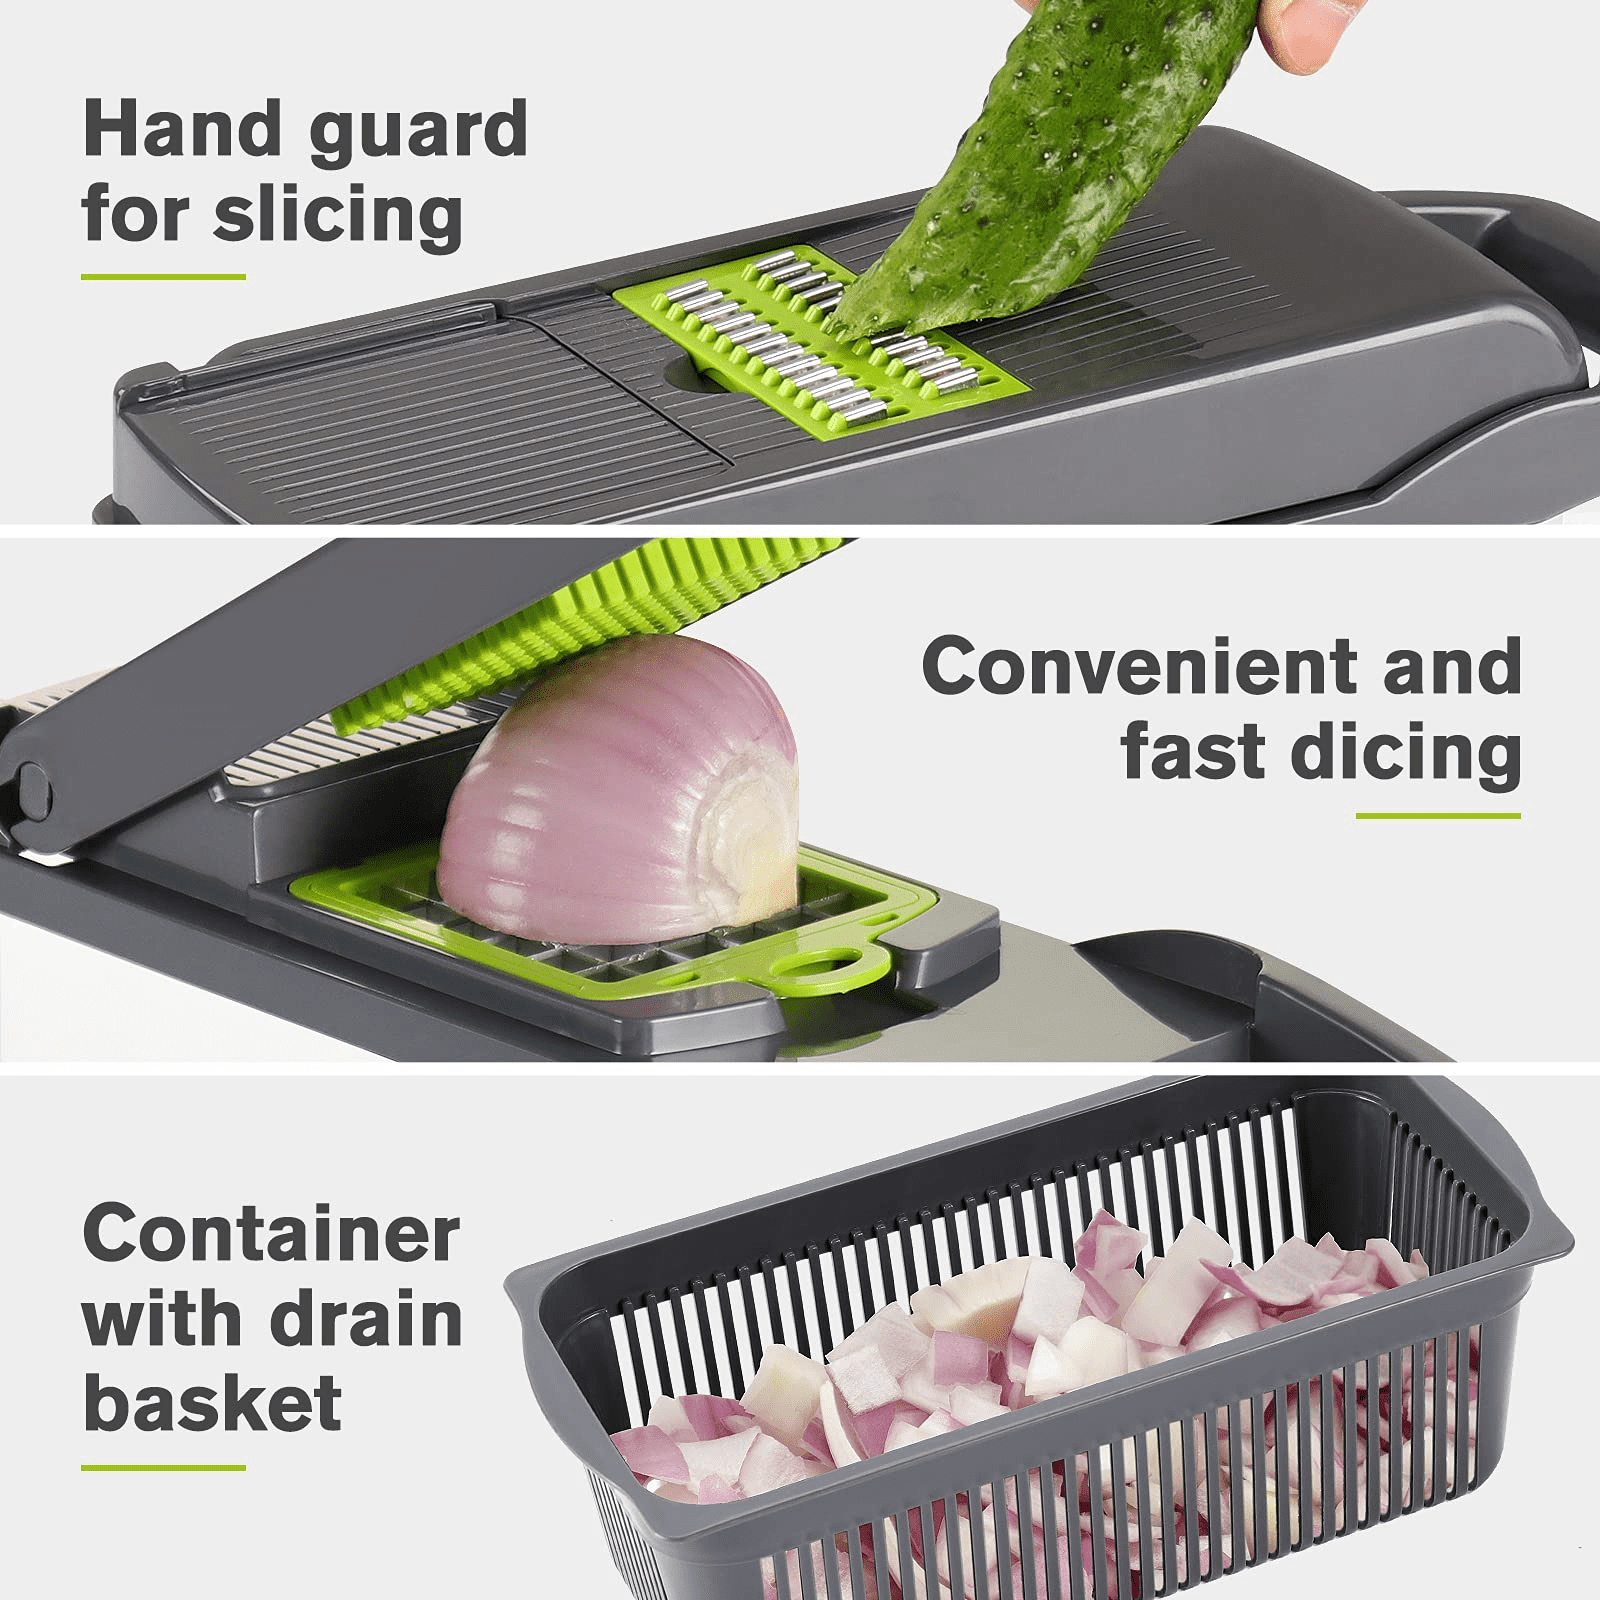 VIGIND 12-in-1 Multifunctional Vegetable Chopper and Cutter,Salad Veggie Cutter Chopper with 7 Blades and Container,Manual Hand Food Slicer Chopper